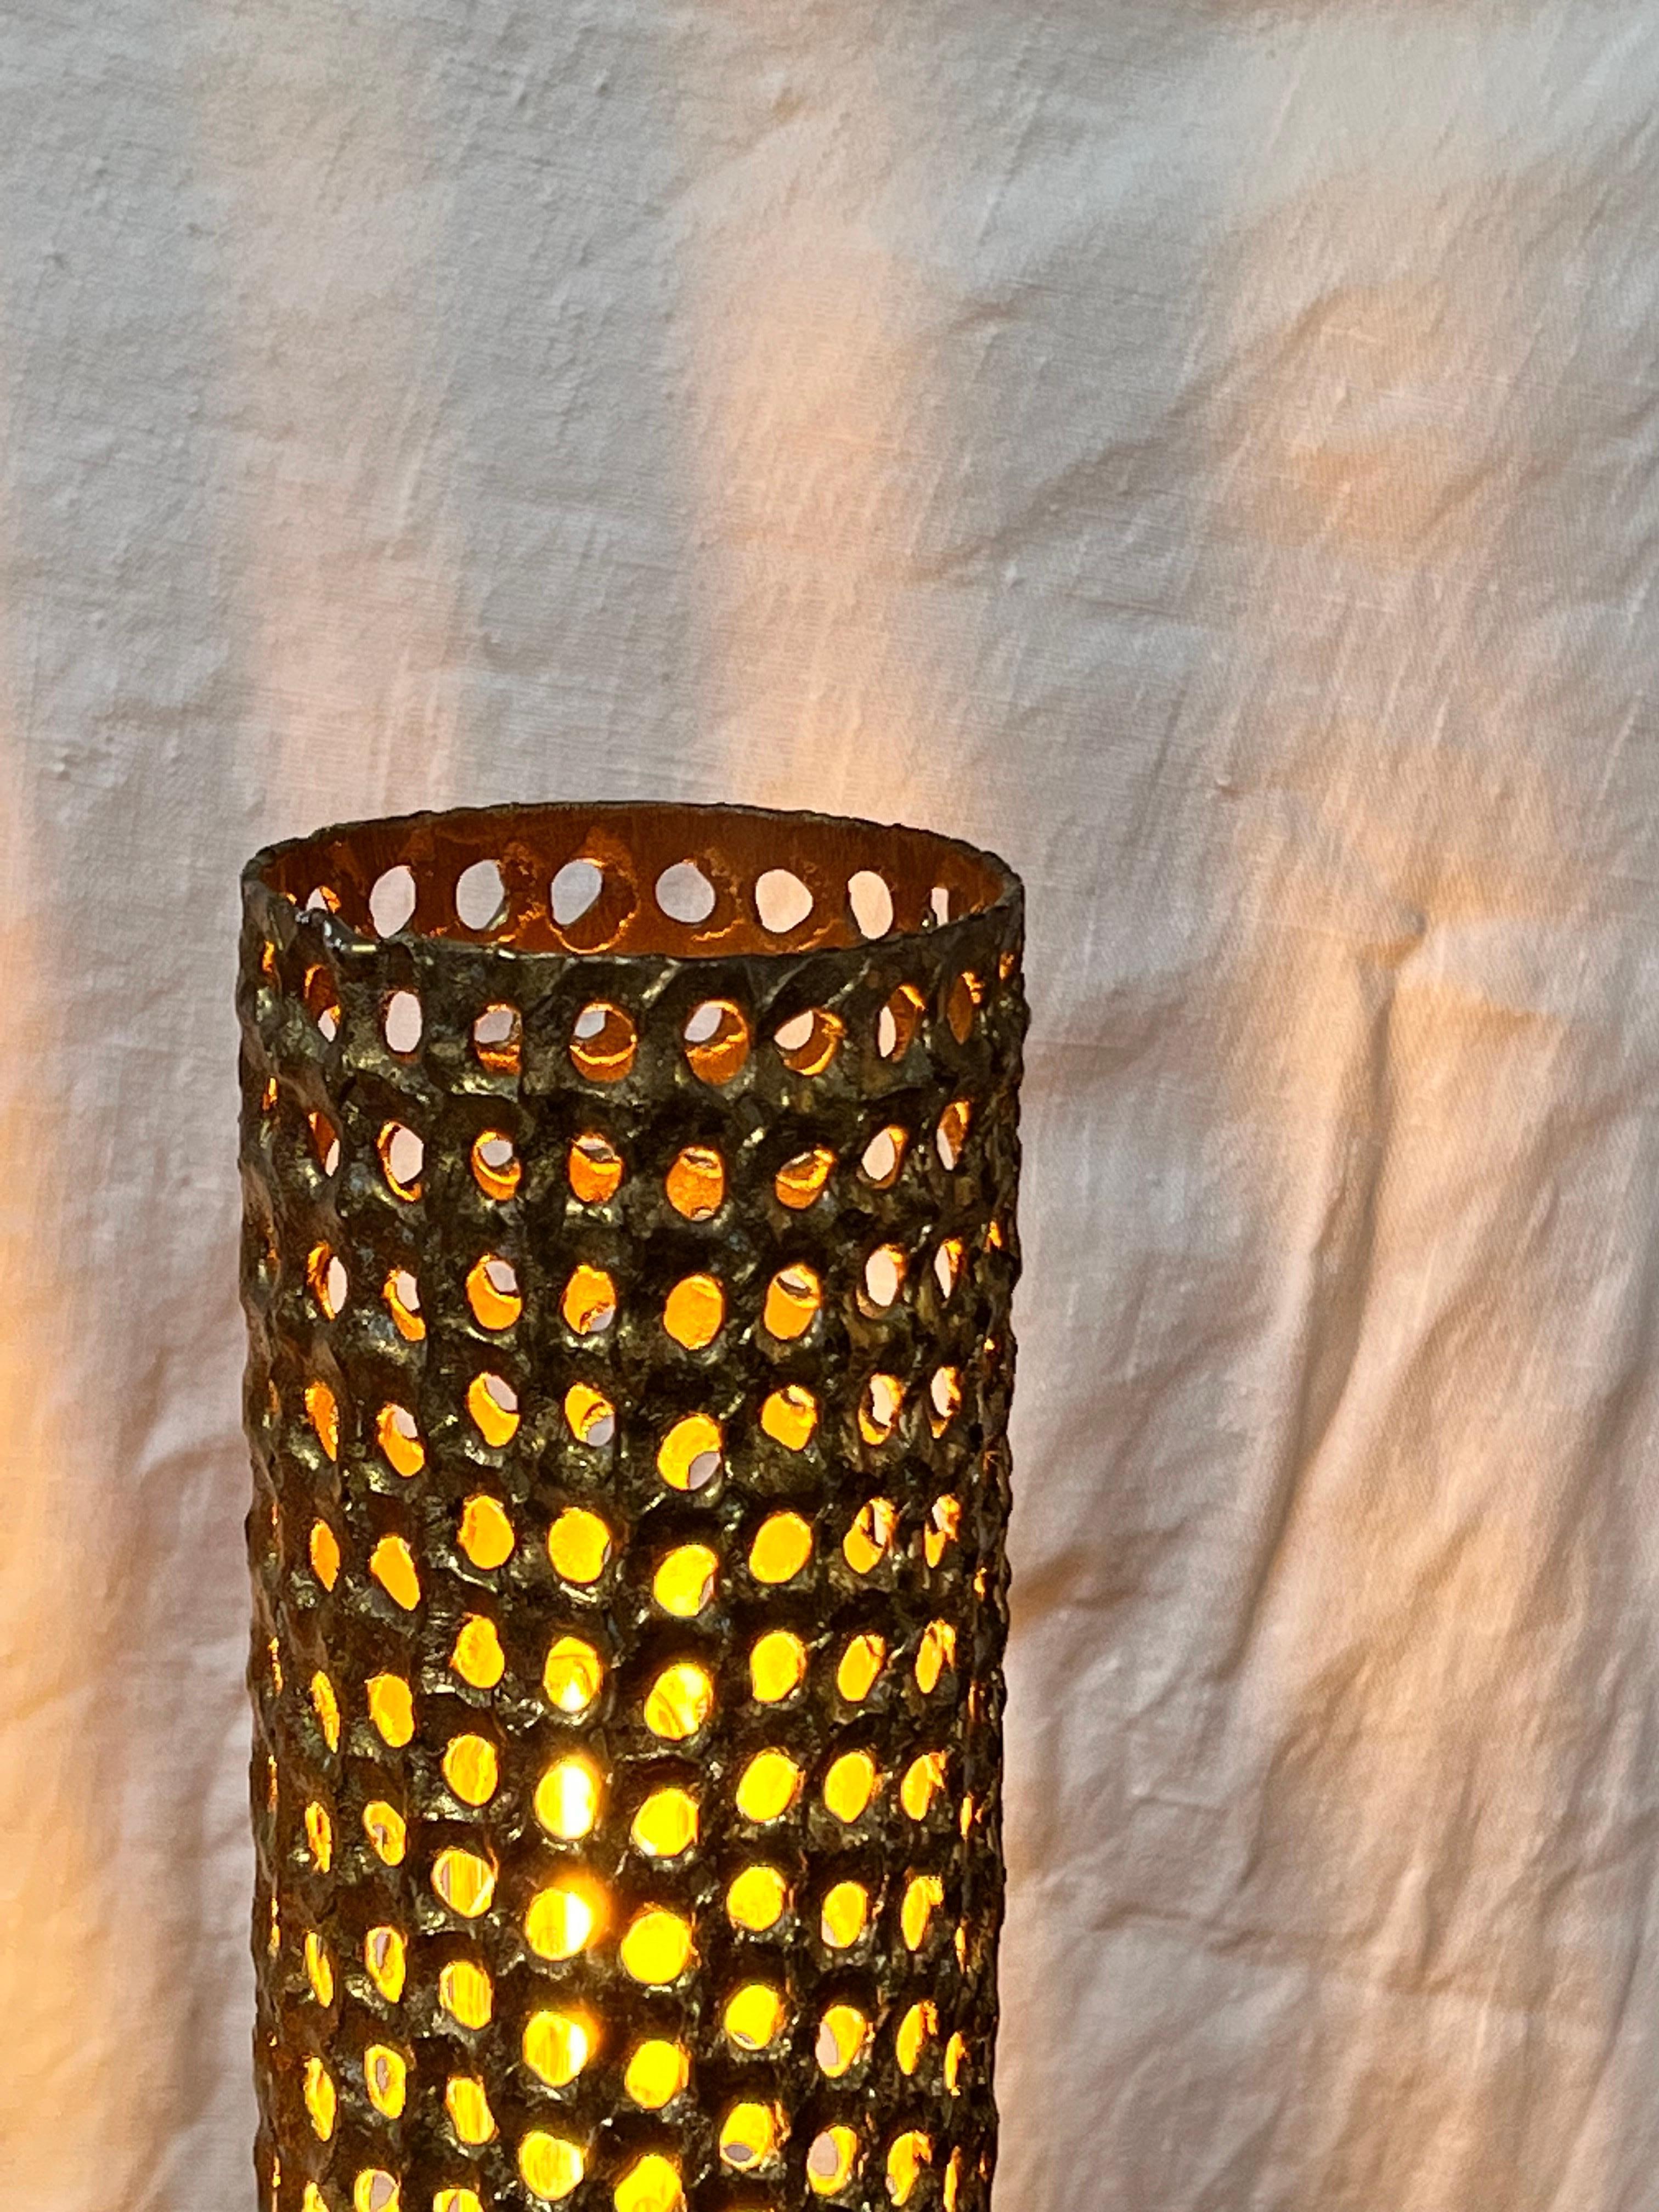 This table lamp was hand crafted in 1975 and 1978 at the Skultuna studio were Pierre Forssell was working with he's assistant. The lamp is made of a brass tube where some holes were drilled with the torch by these skilled craftsmans. Simple, minimal